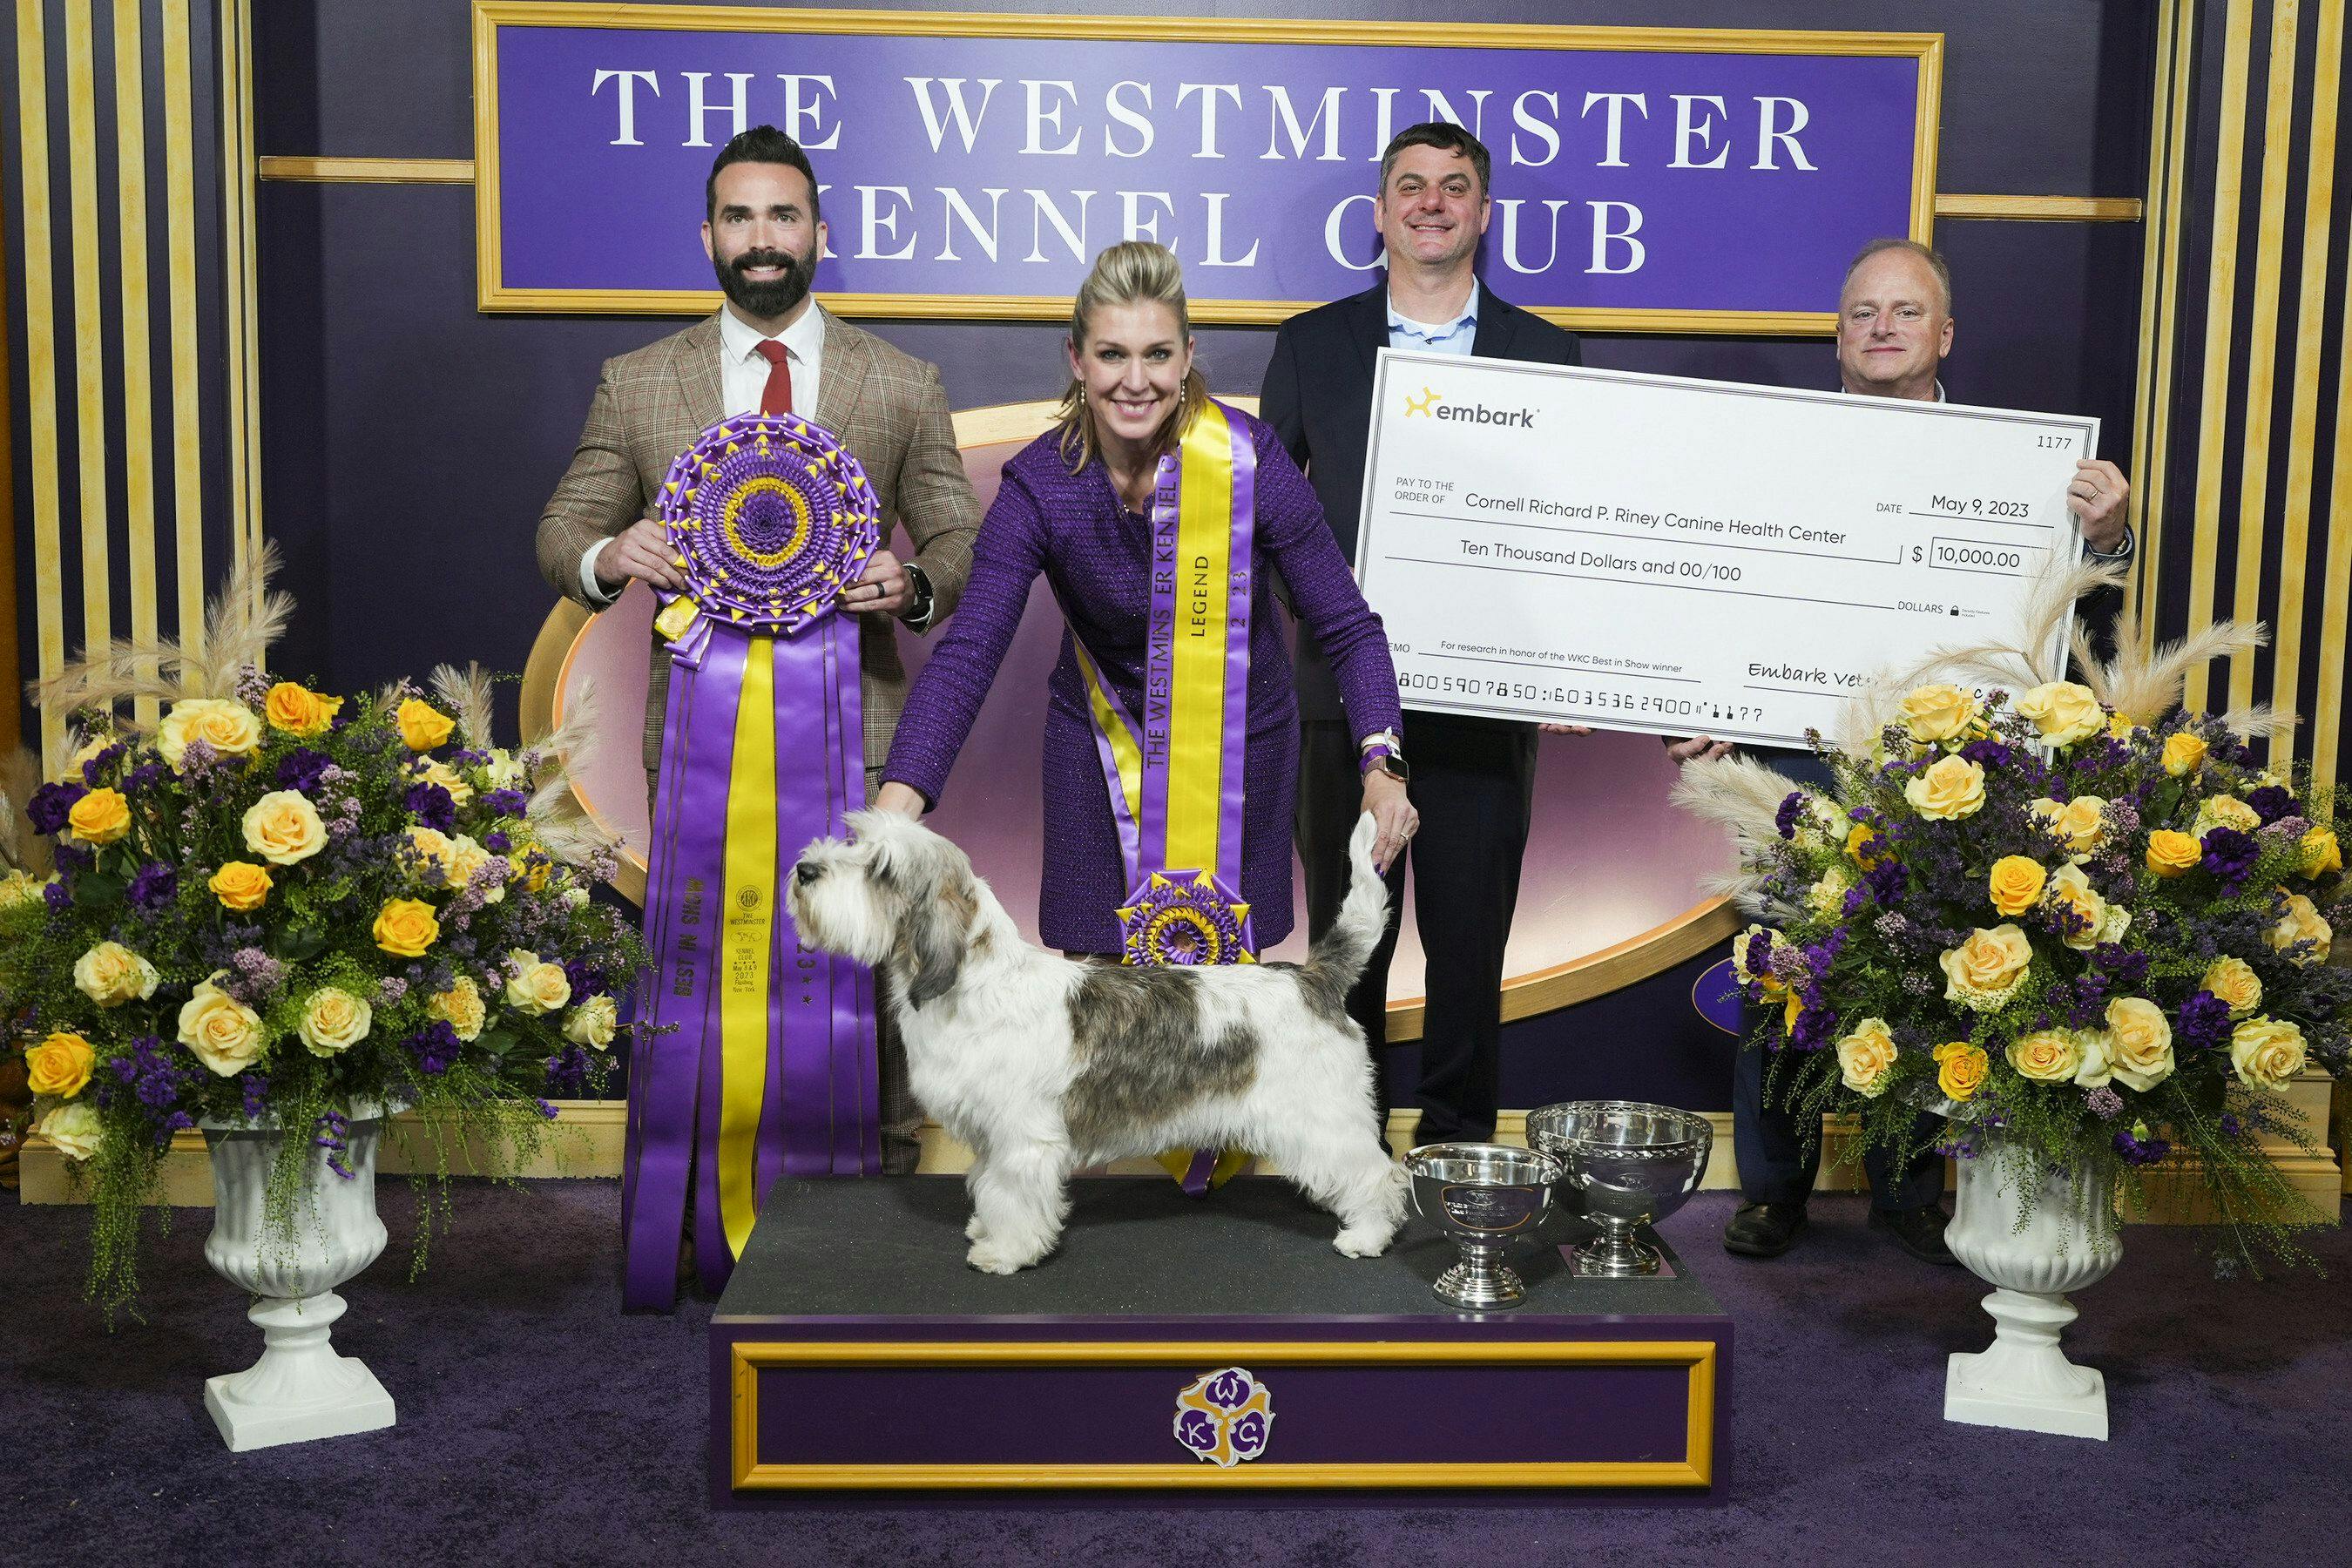 Buddy the Petit Basset Griffon Vendéen, at the Westminster Dog Show. ( Image courtesy of Embark Veterinary Inc)